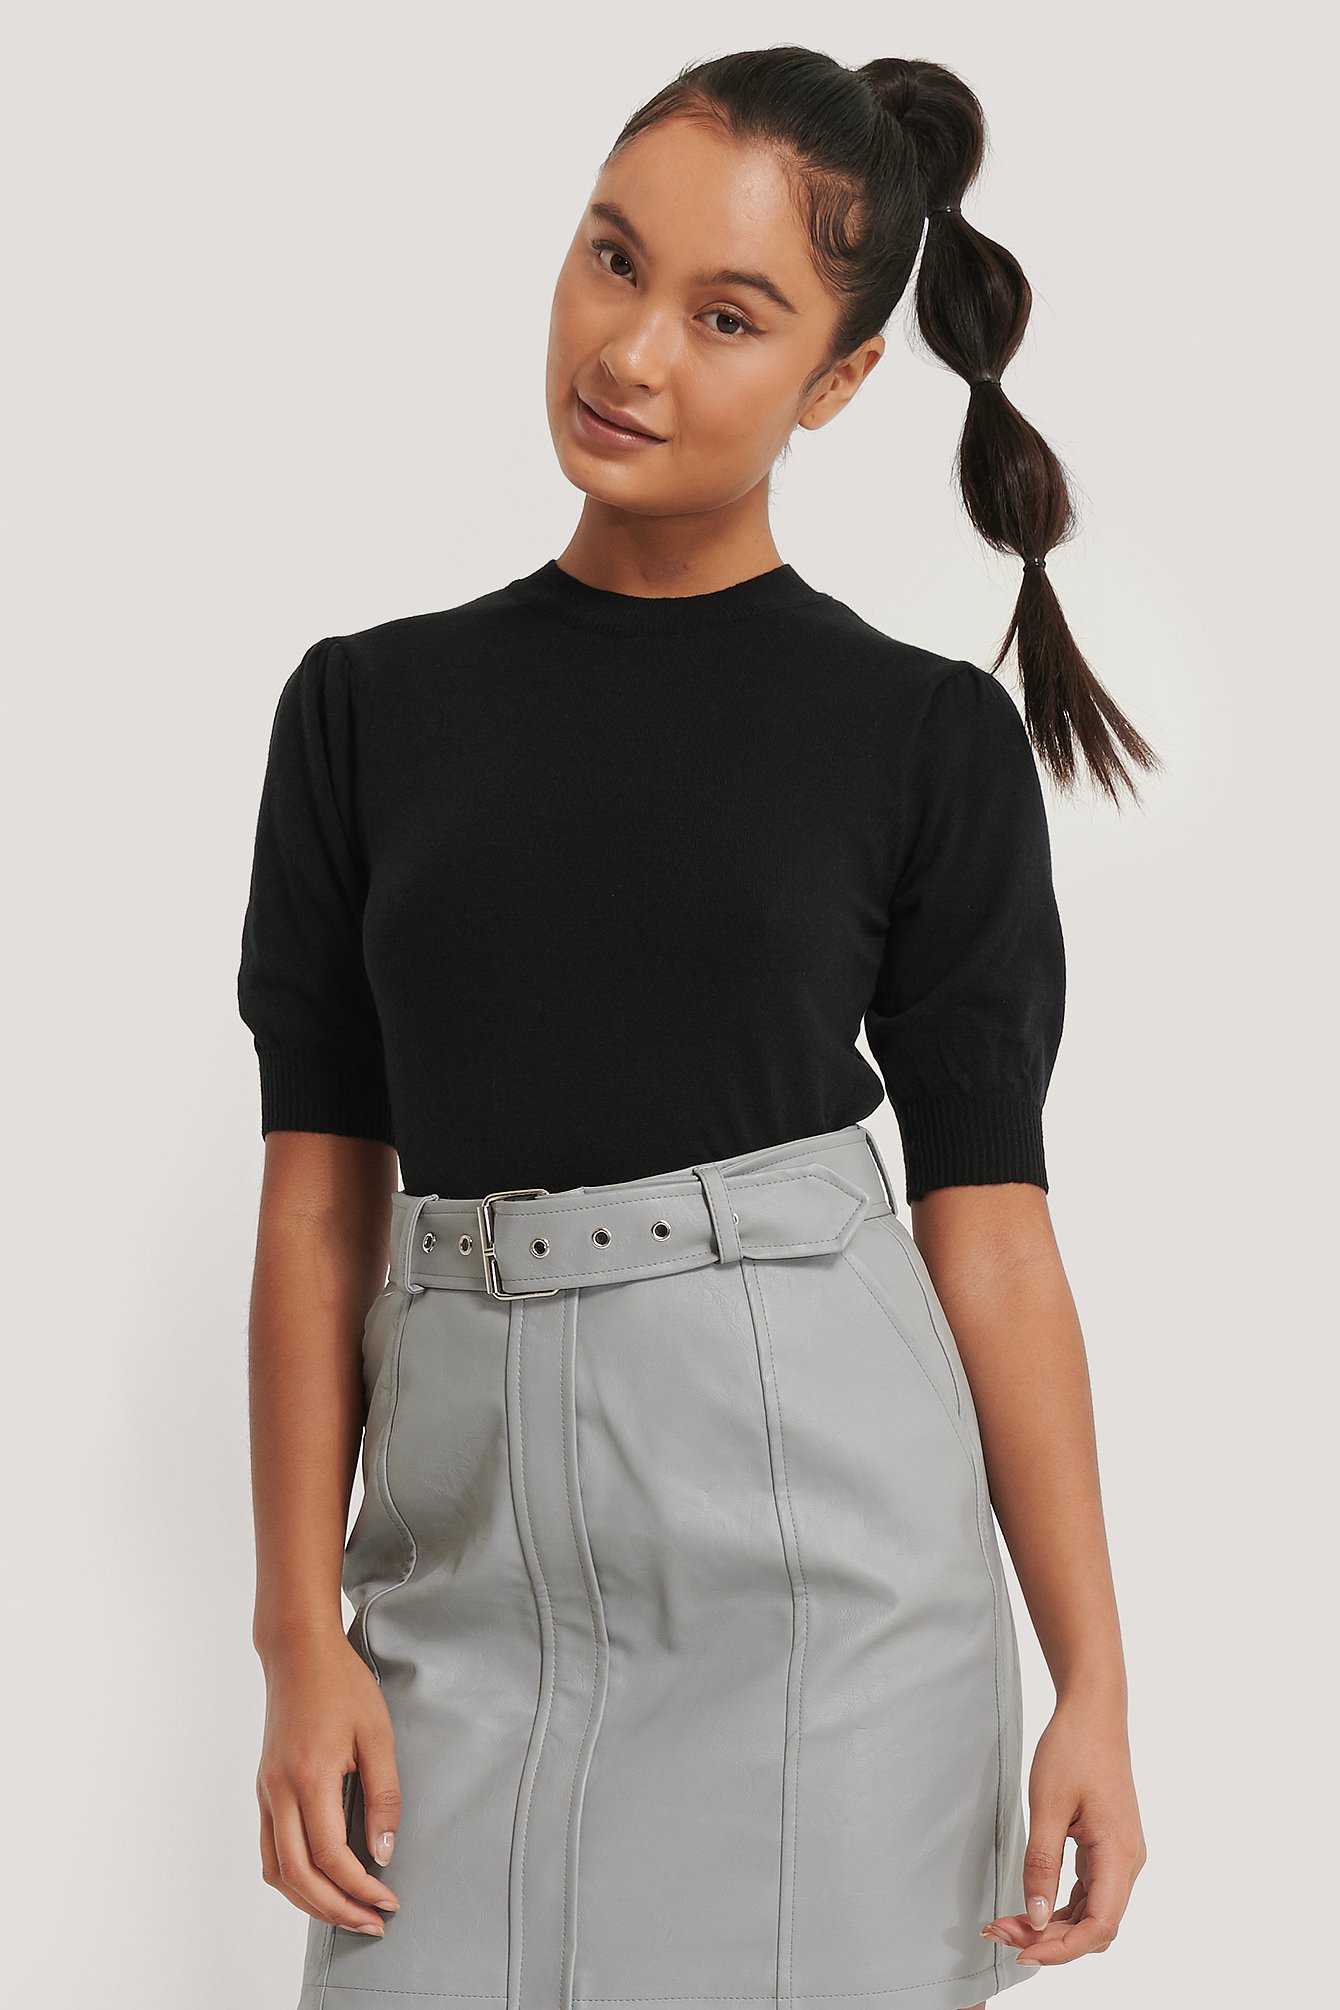 Black Short Sleeve Knitted Top